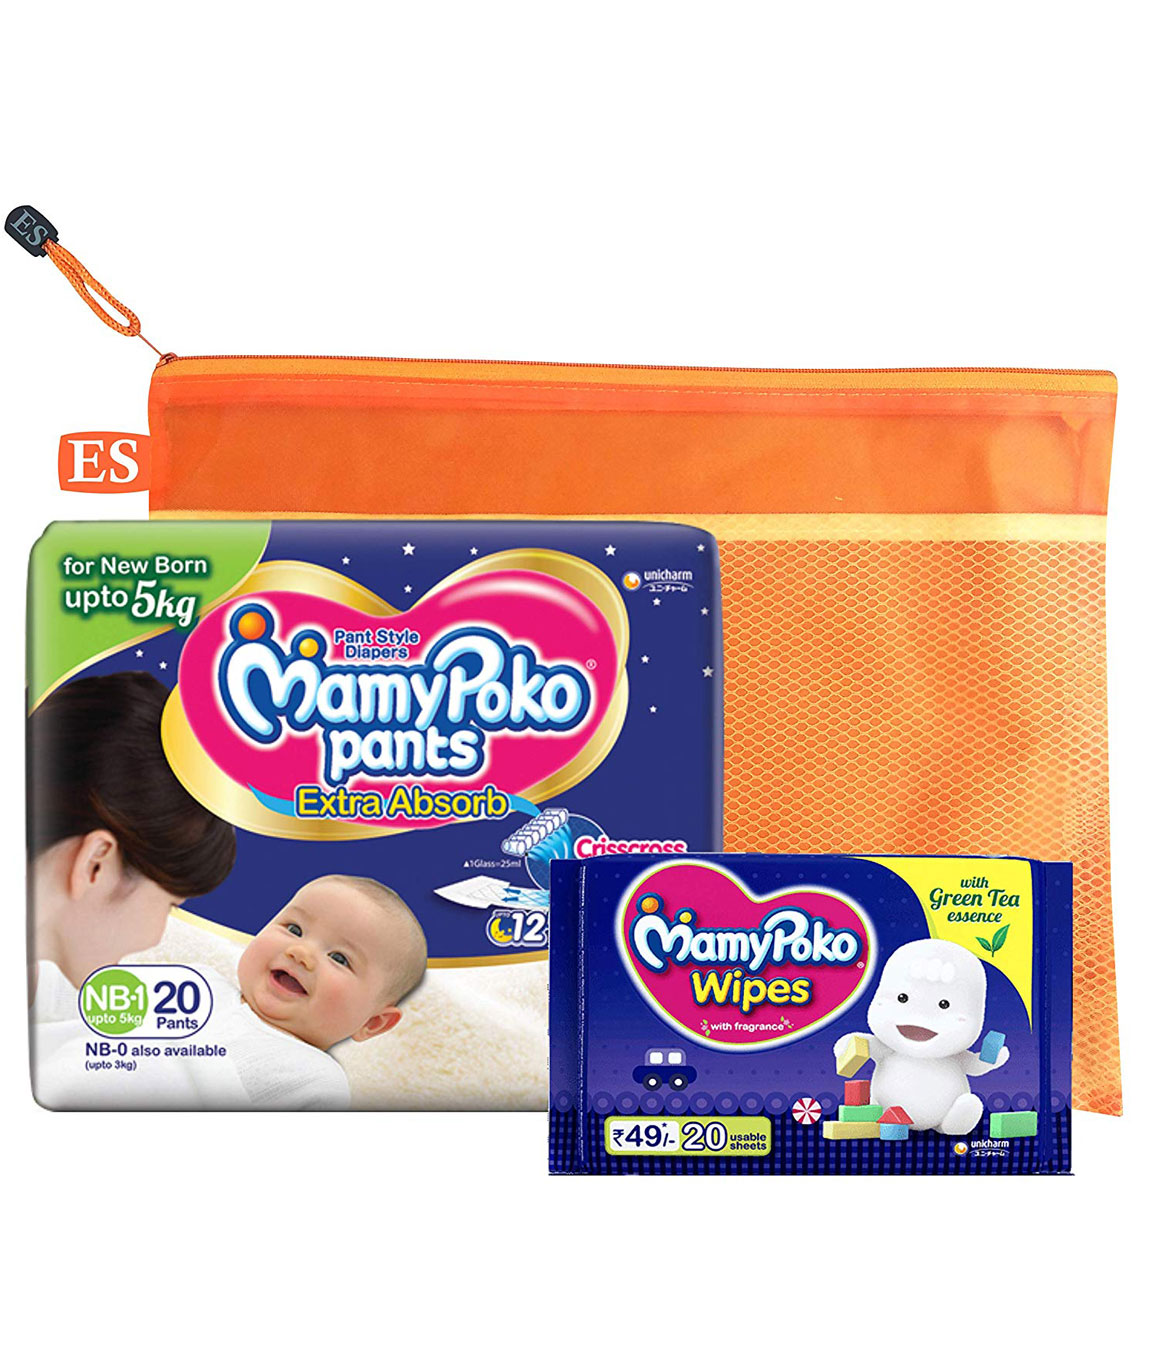 Buy MamyPoko Pants for New Born (10 Count) Online at Low Prices in India -  Amazon.in